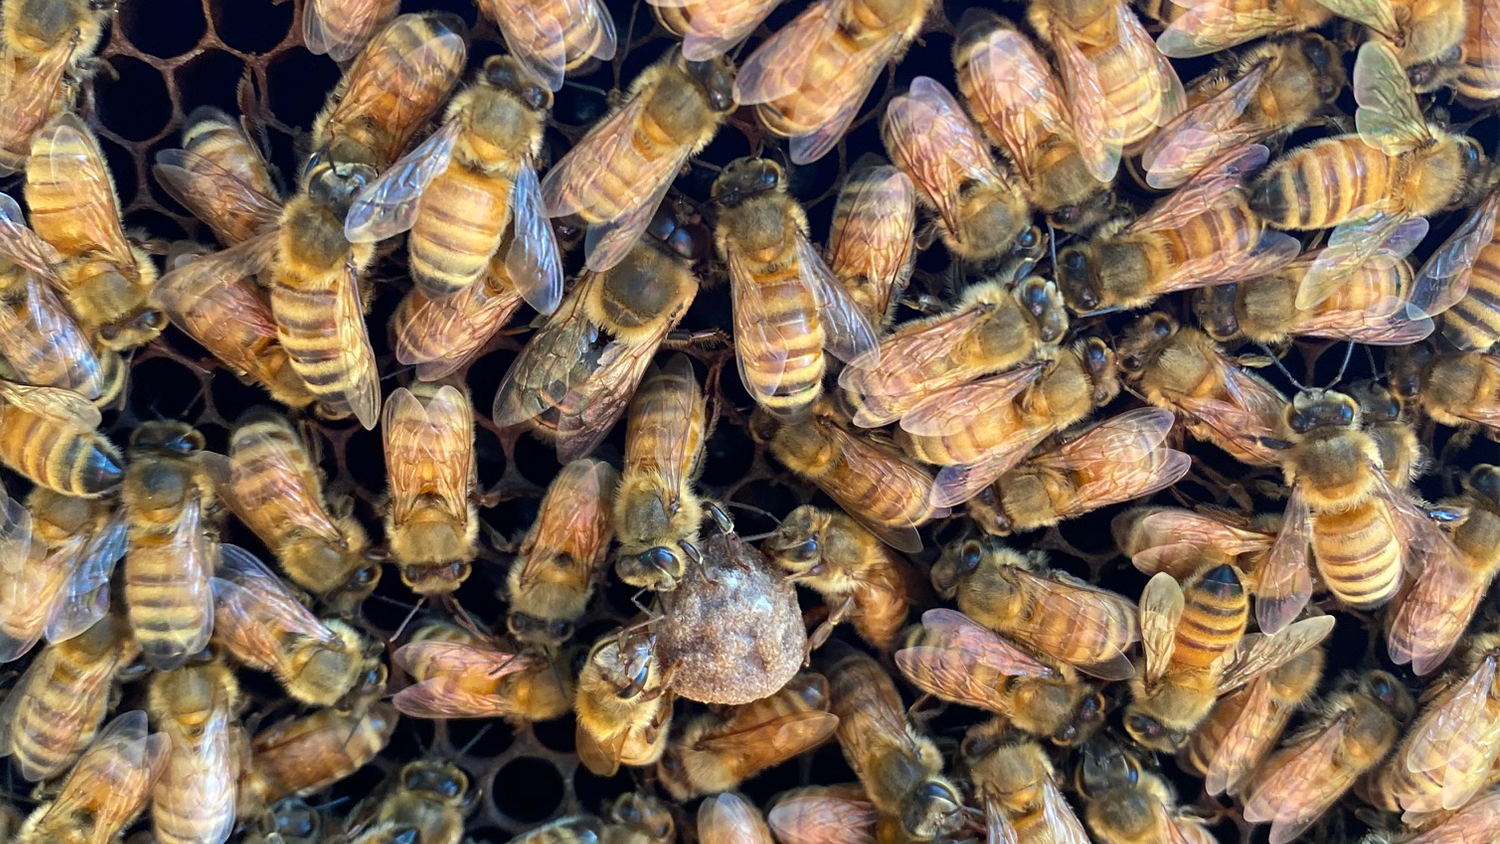 A close up of bees on a beehive